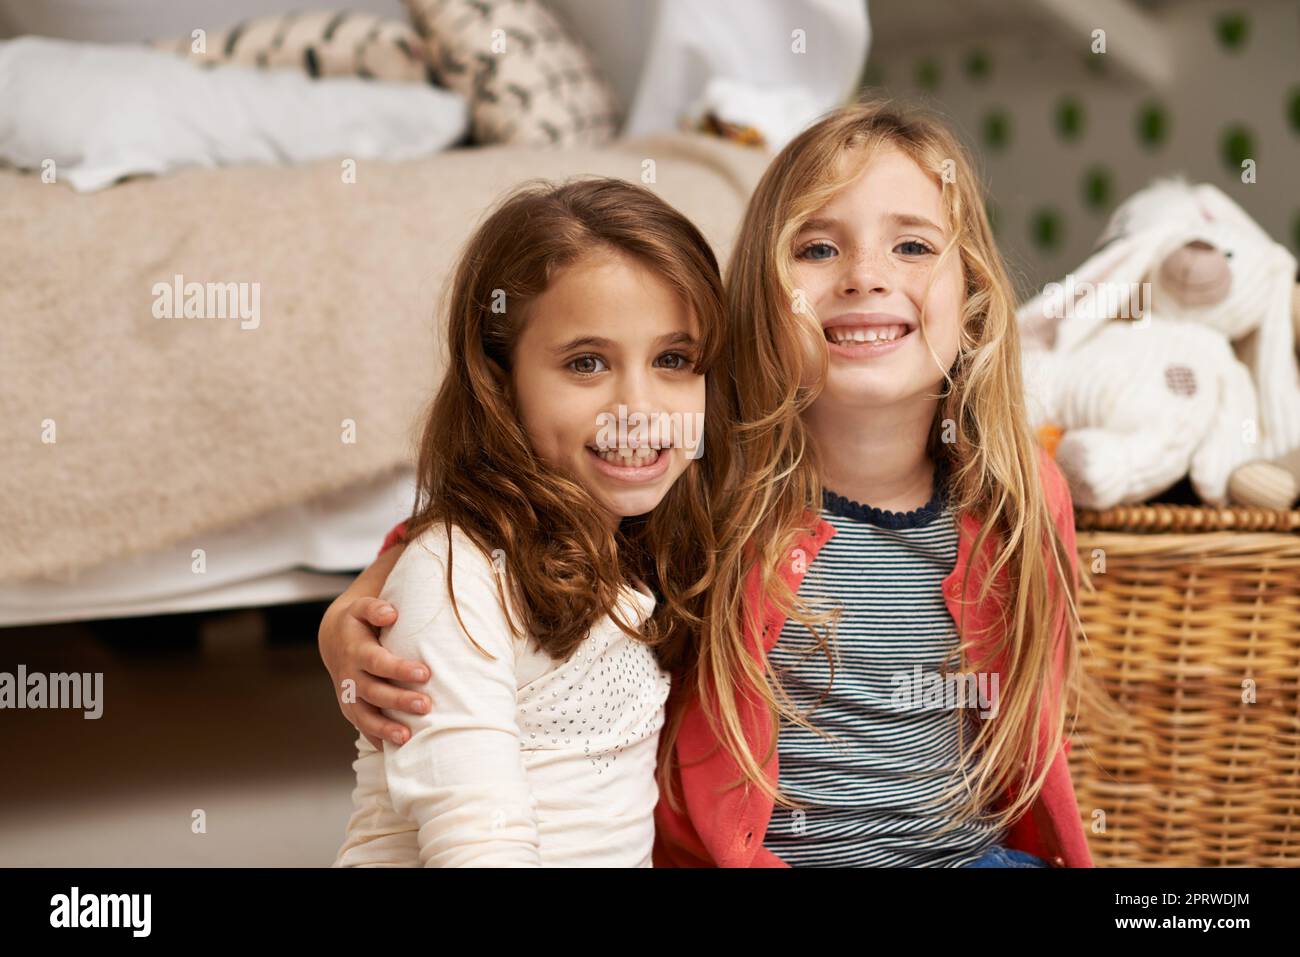 Best friends forever. Portrait of two little girls spending time together indoors. Stock Photo